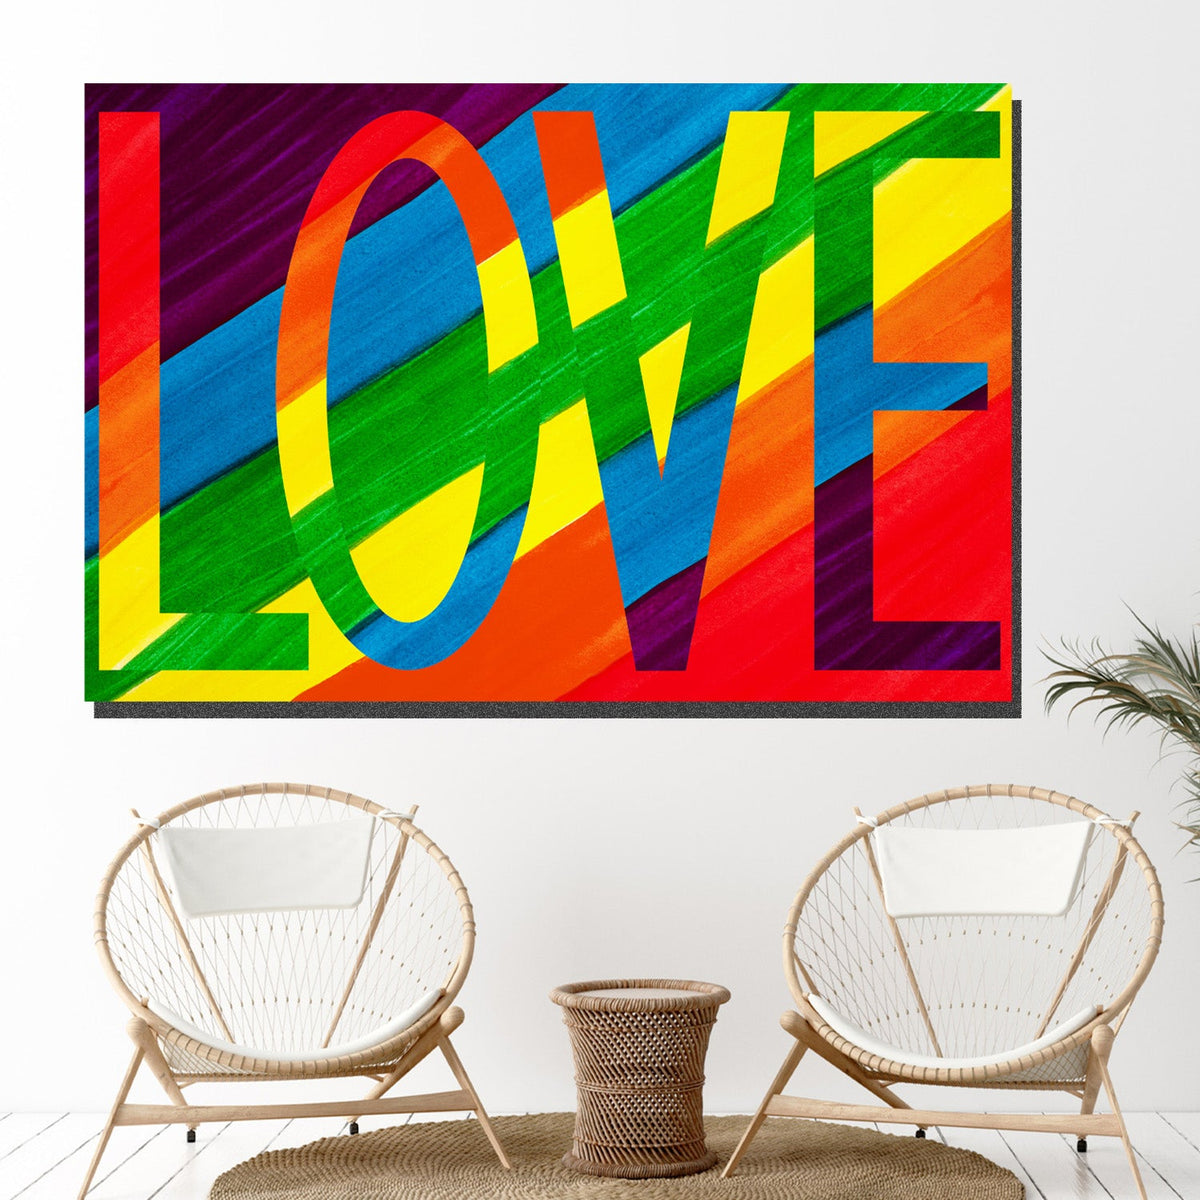 https://cdn.shopify.com/s/files/1/0387/9986/8044/products/ColoursofLoveCanvasArtprintStretched-3.jpg